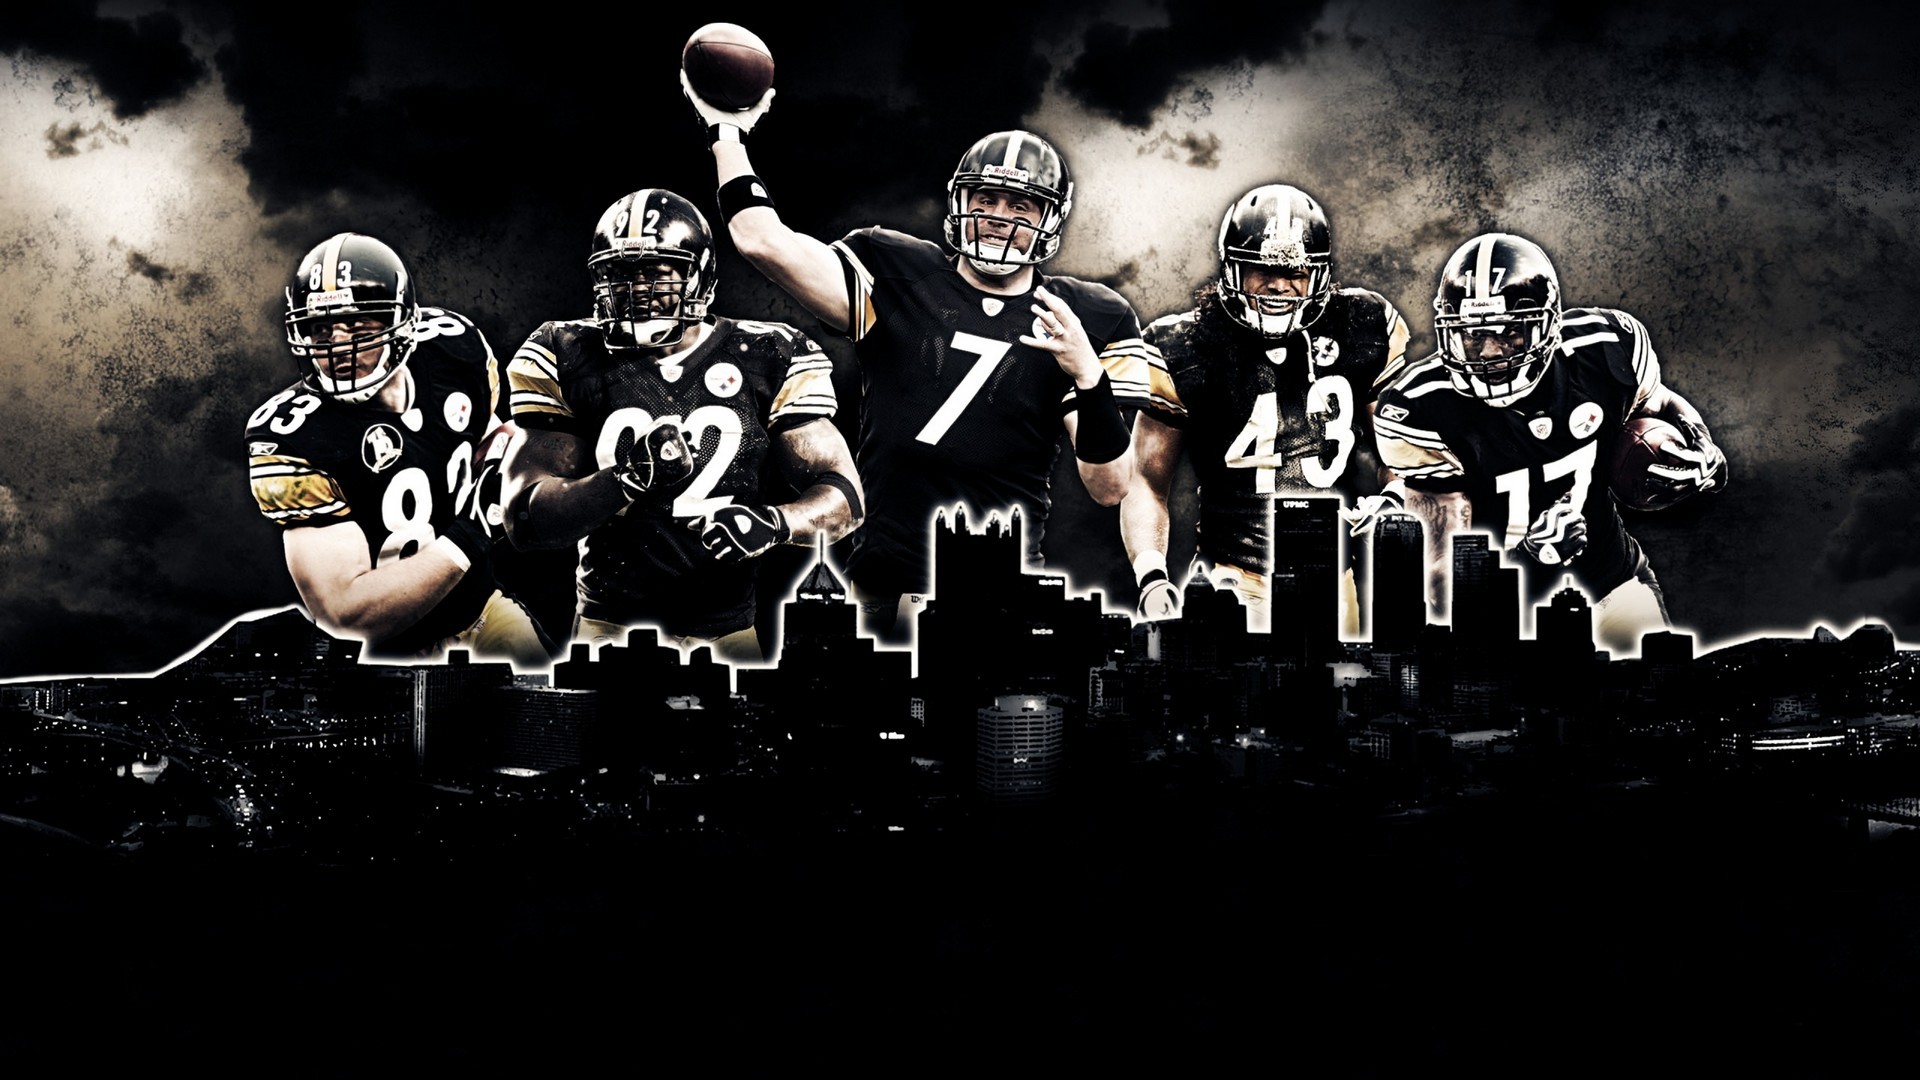 Pittsburgh Steelers Desktop Wallpaper With Resolution 1920X1080 pixel. You can make this wallpaper for your Mac or Windows Desktop Background, iPhone, Android or Tablet and another Smartphone device for free